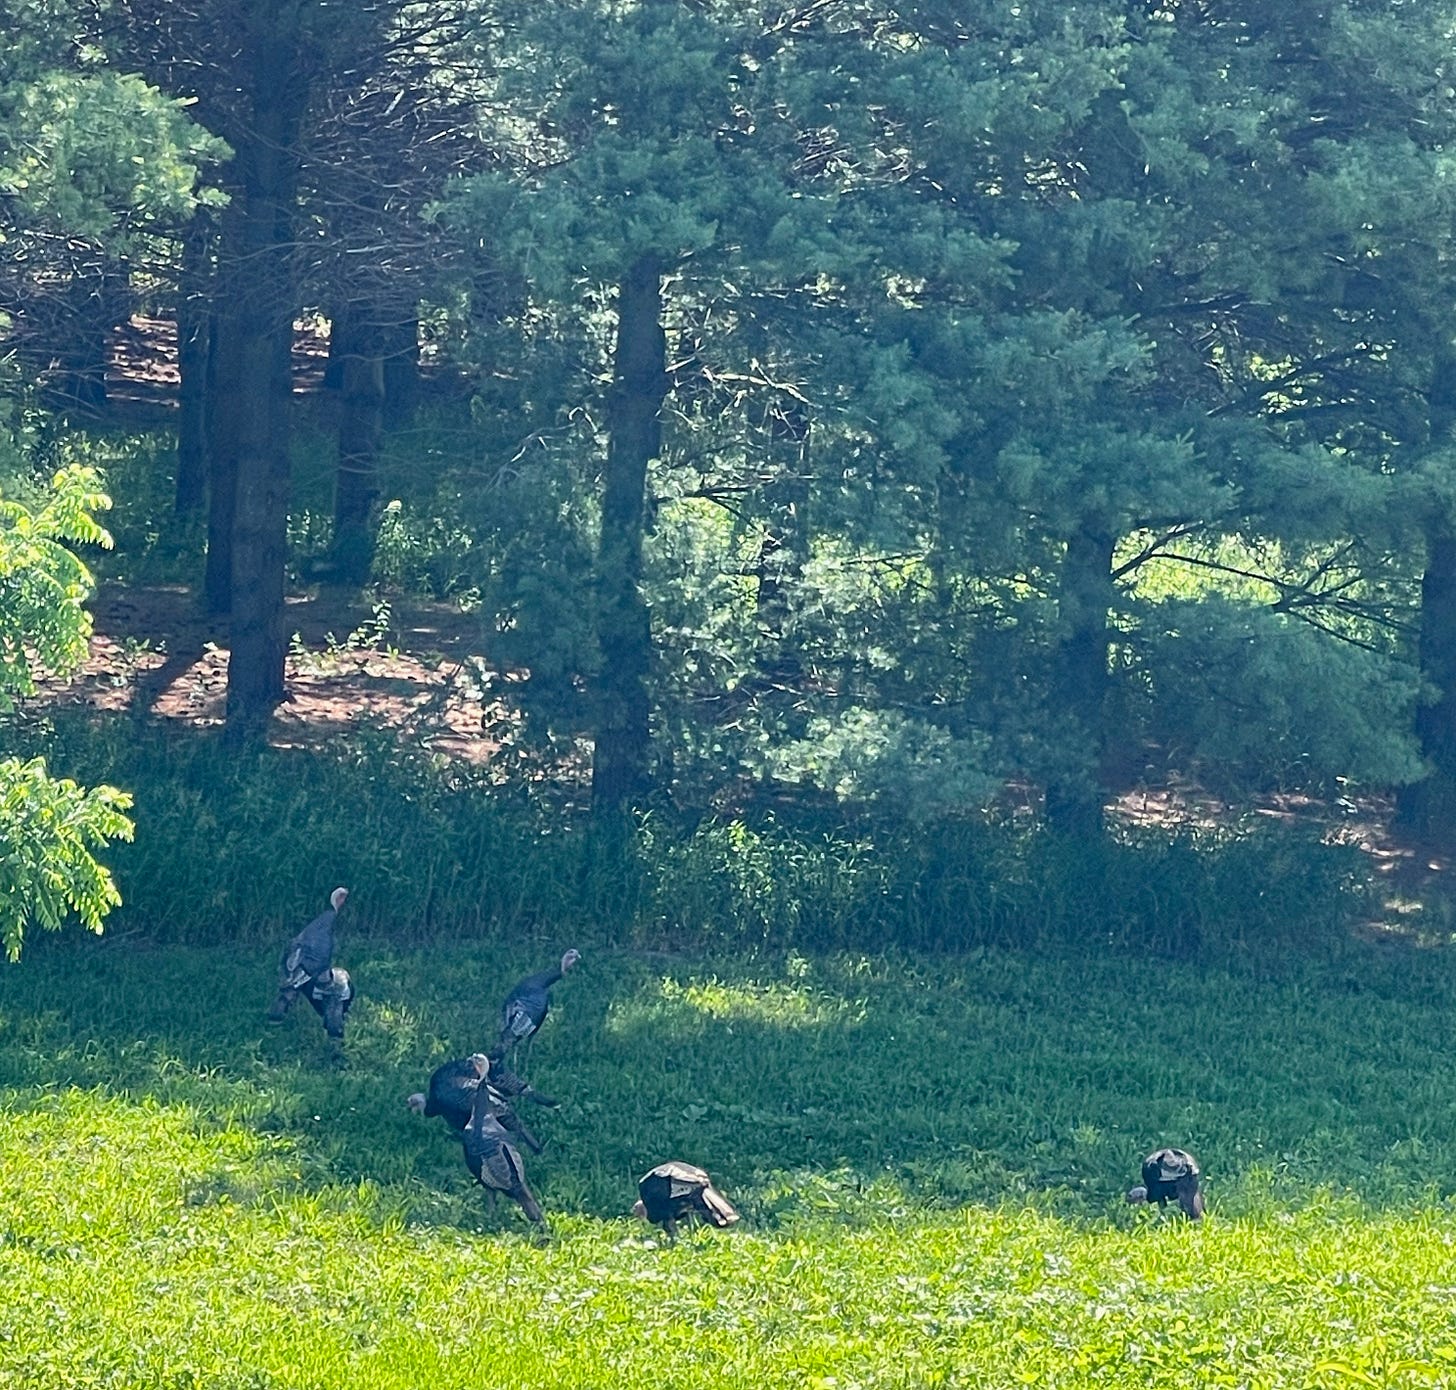 A flock of turkeys approaching a wooded area